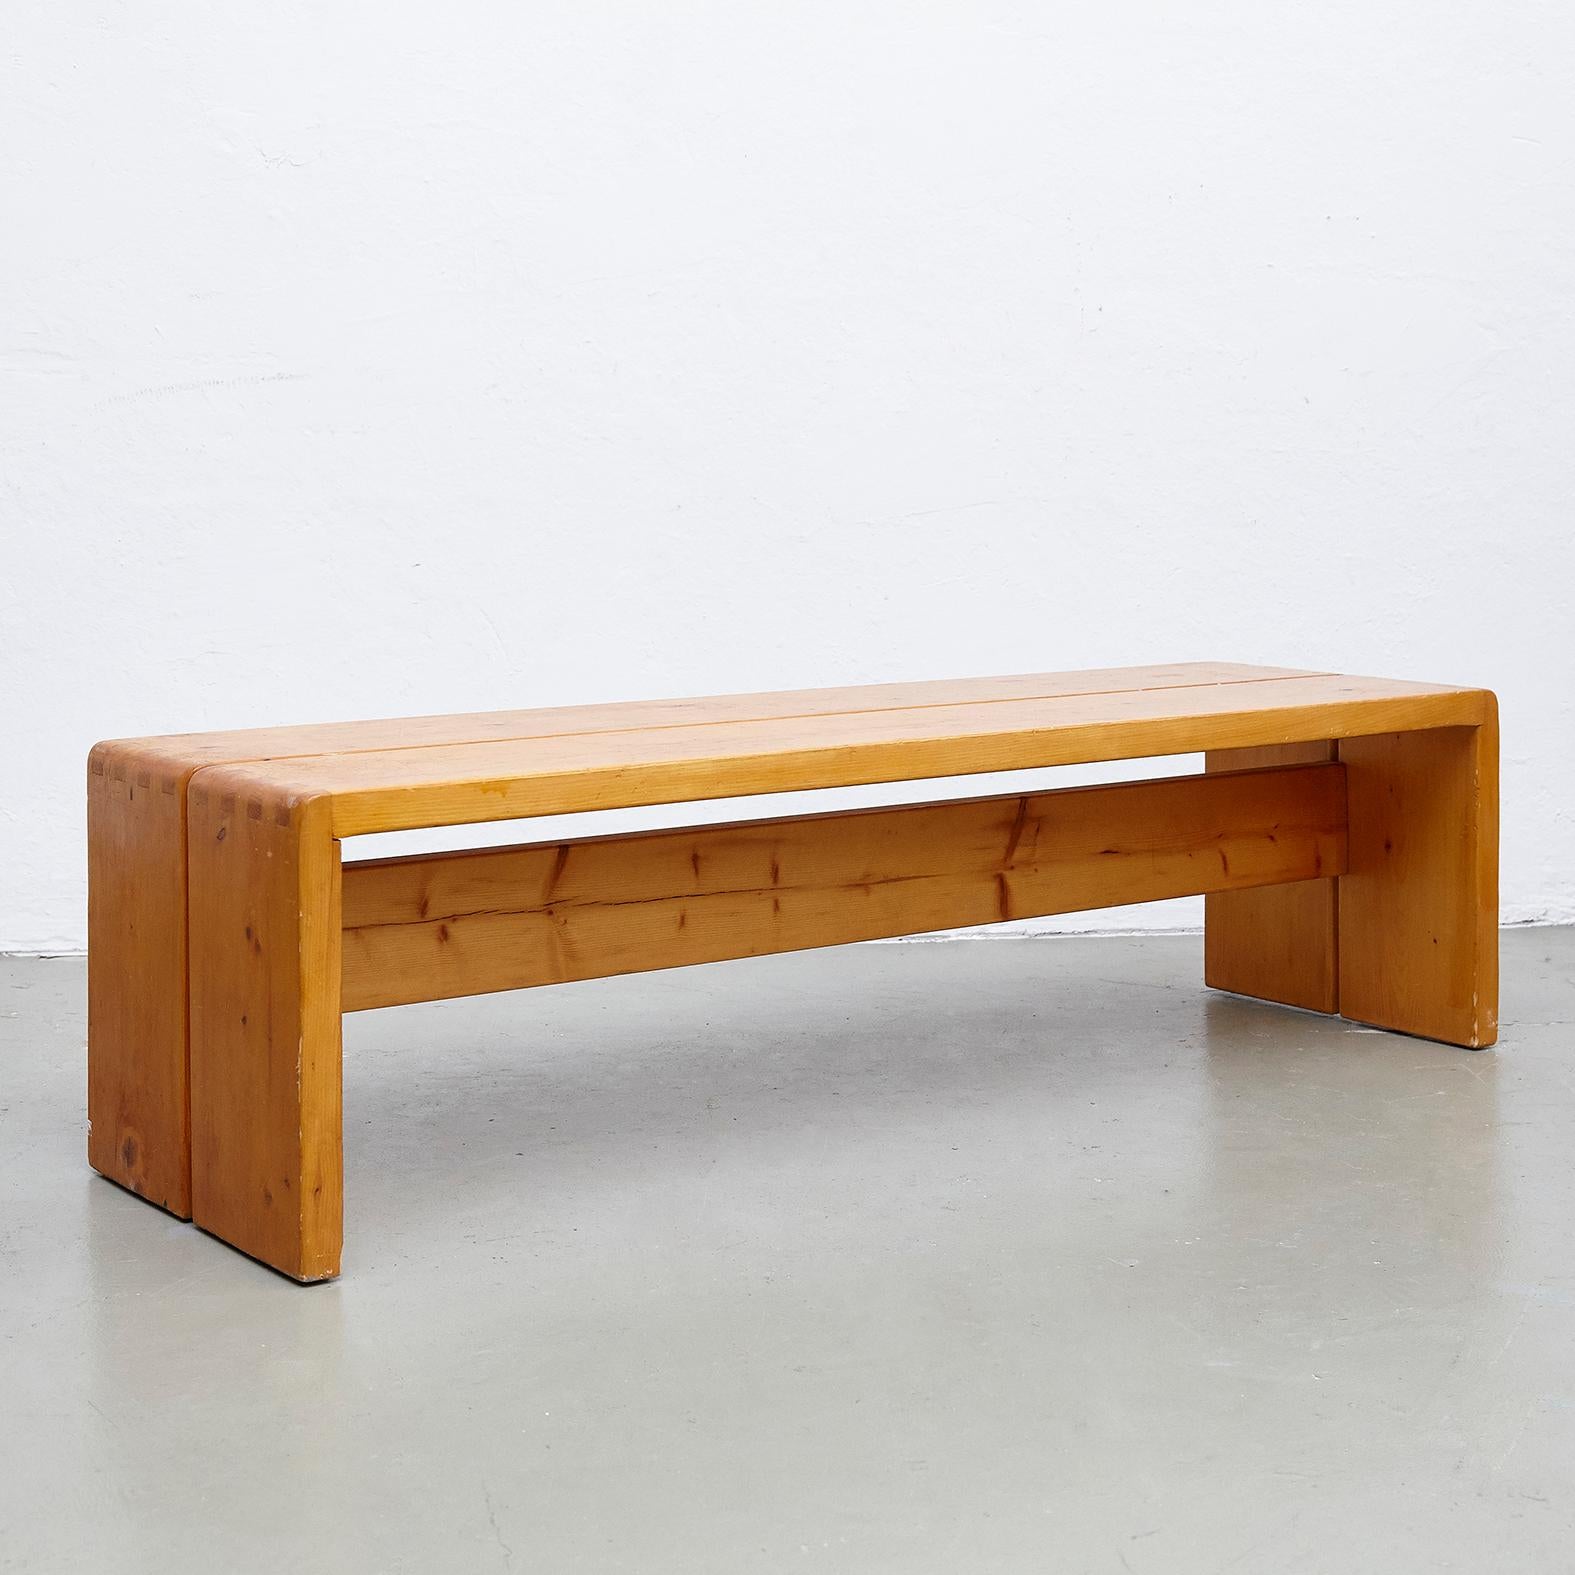 Pine Charlotte Perriand, Mid Century Modern Large Wood Bench for Les Arcs, circa 1960